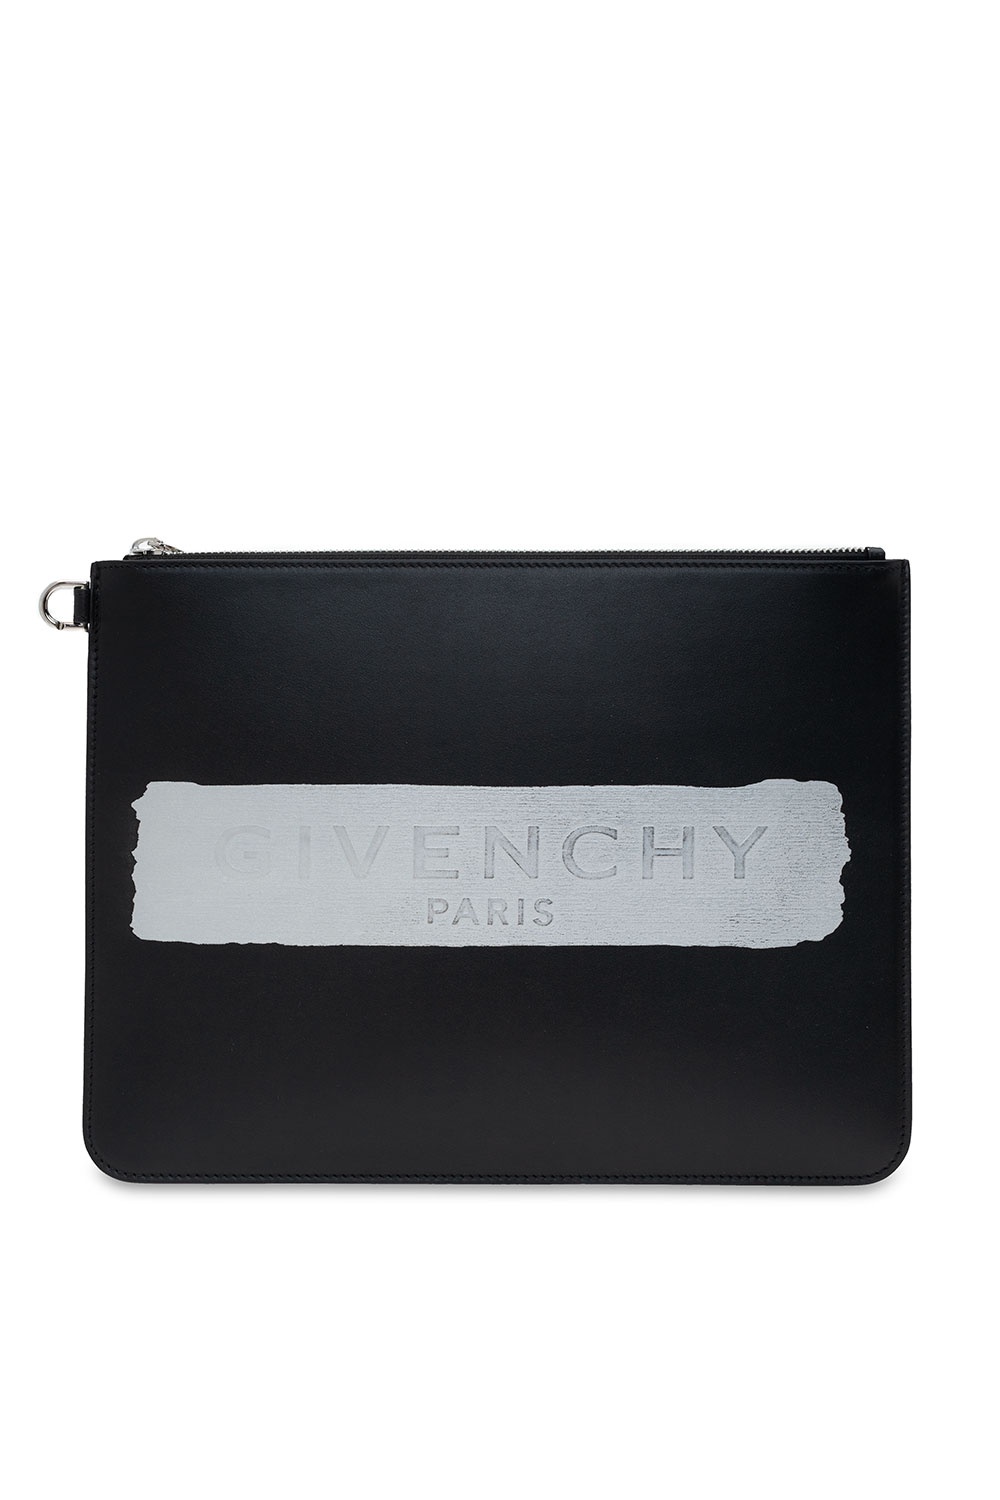 givenchy leather pouch